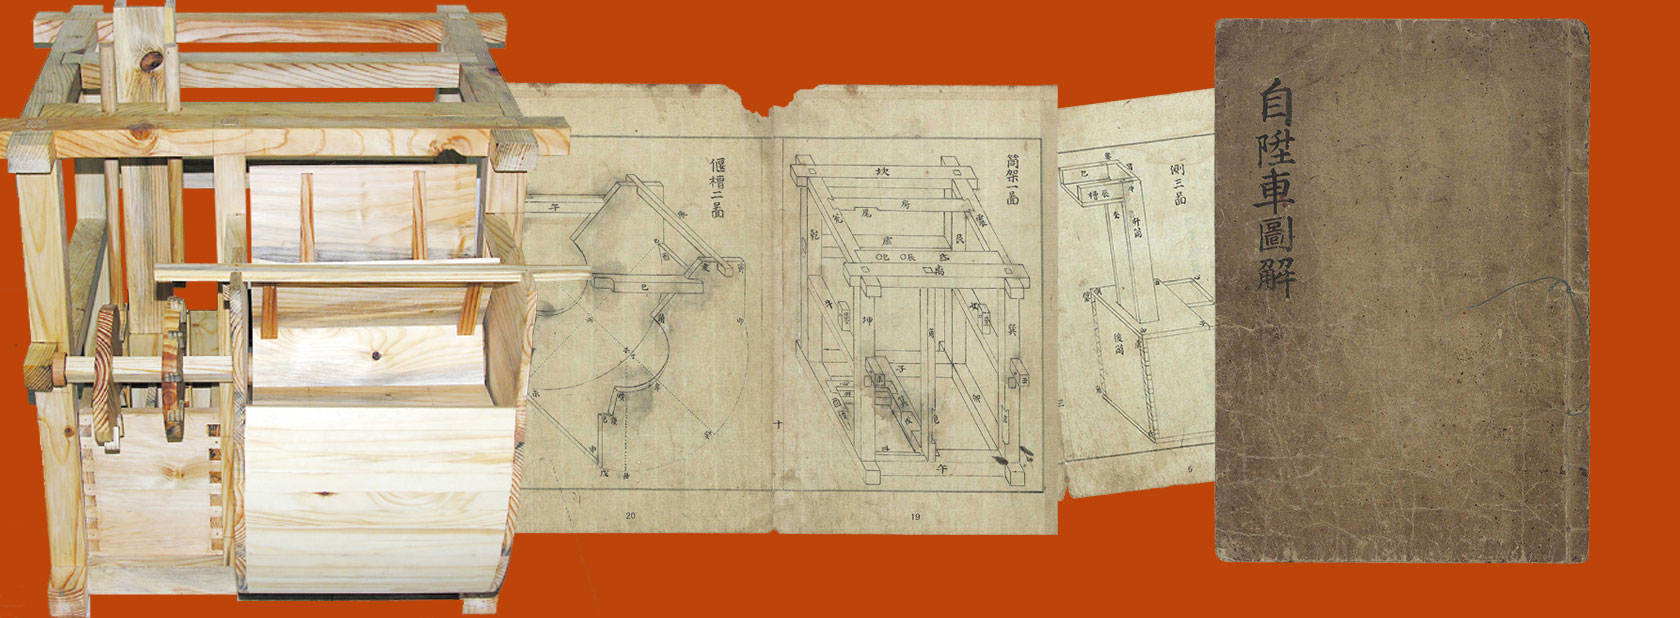 Jaseungcha Blueprint - Jaseungcha, which is similar to an automatic water pump, was invented in 1810 by Gunam whose intention was to help farming areas to overcome drought.